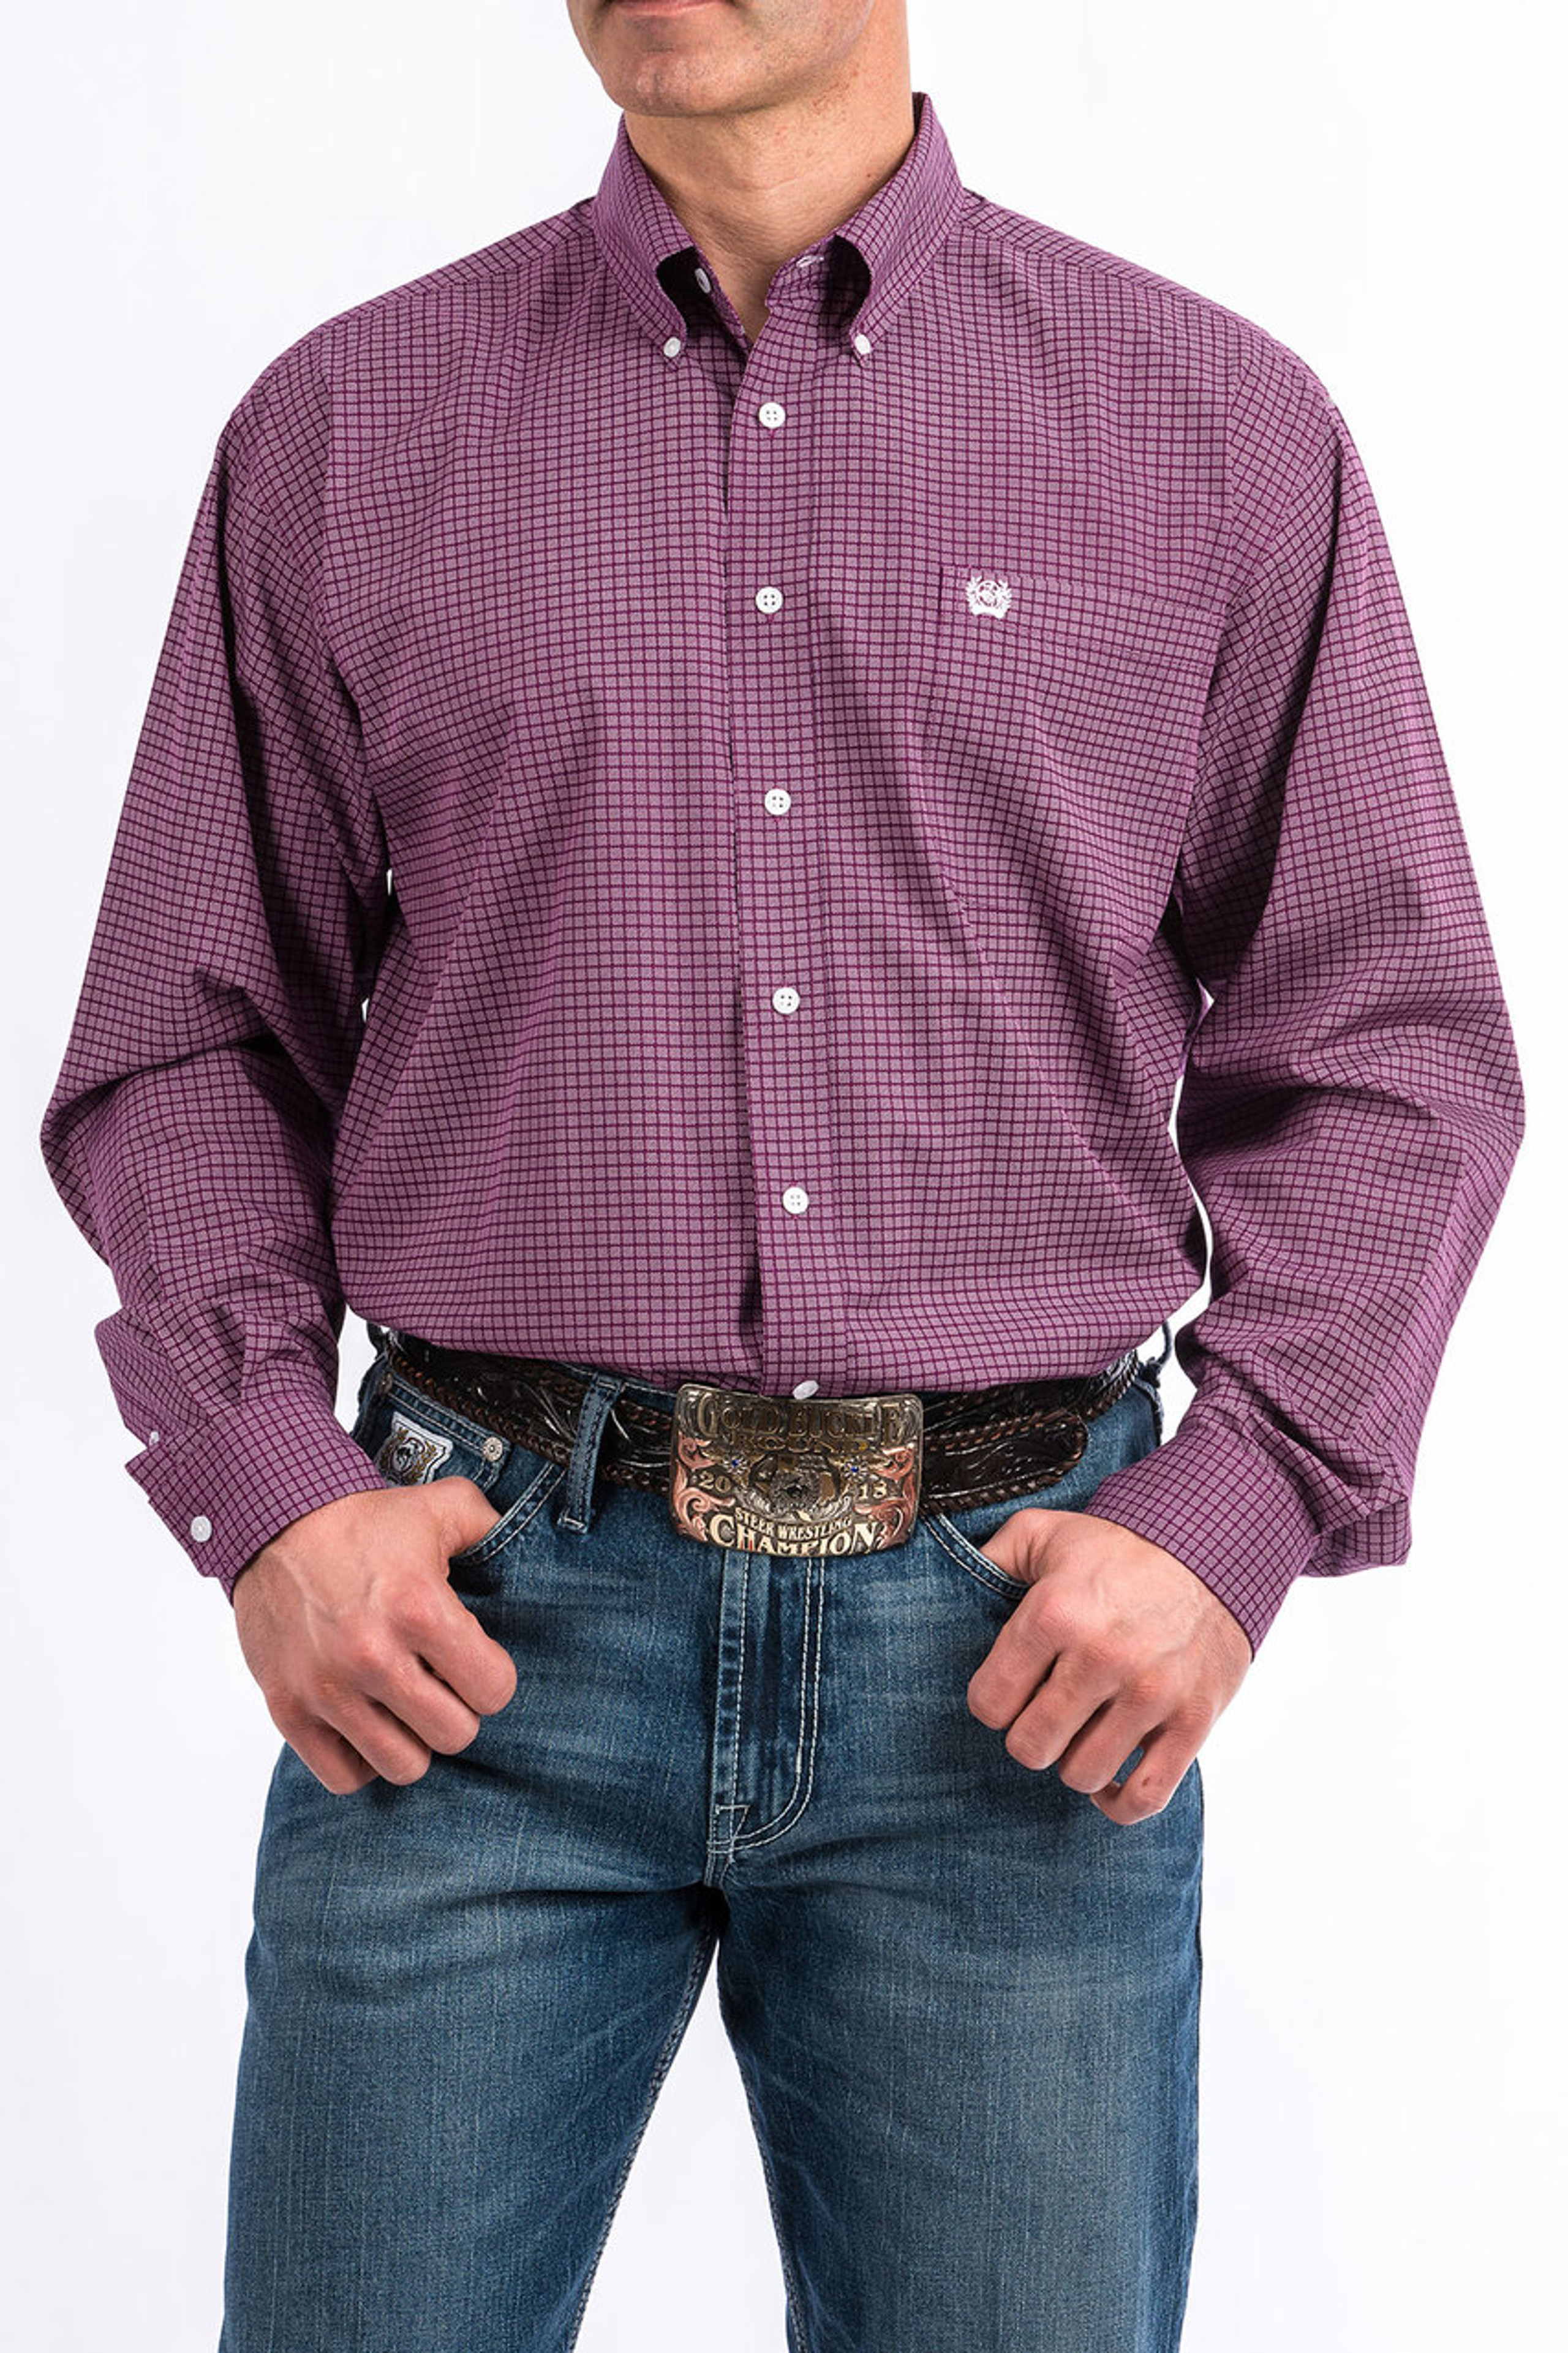 Men's Cinch L/S, Purple with White Print - Chick Elms Grand Entry ...